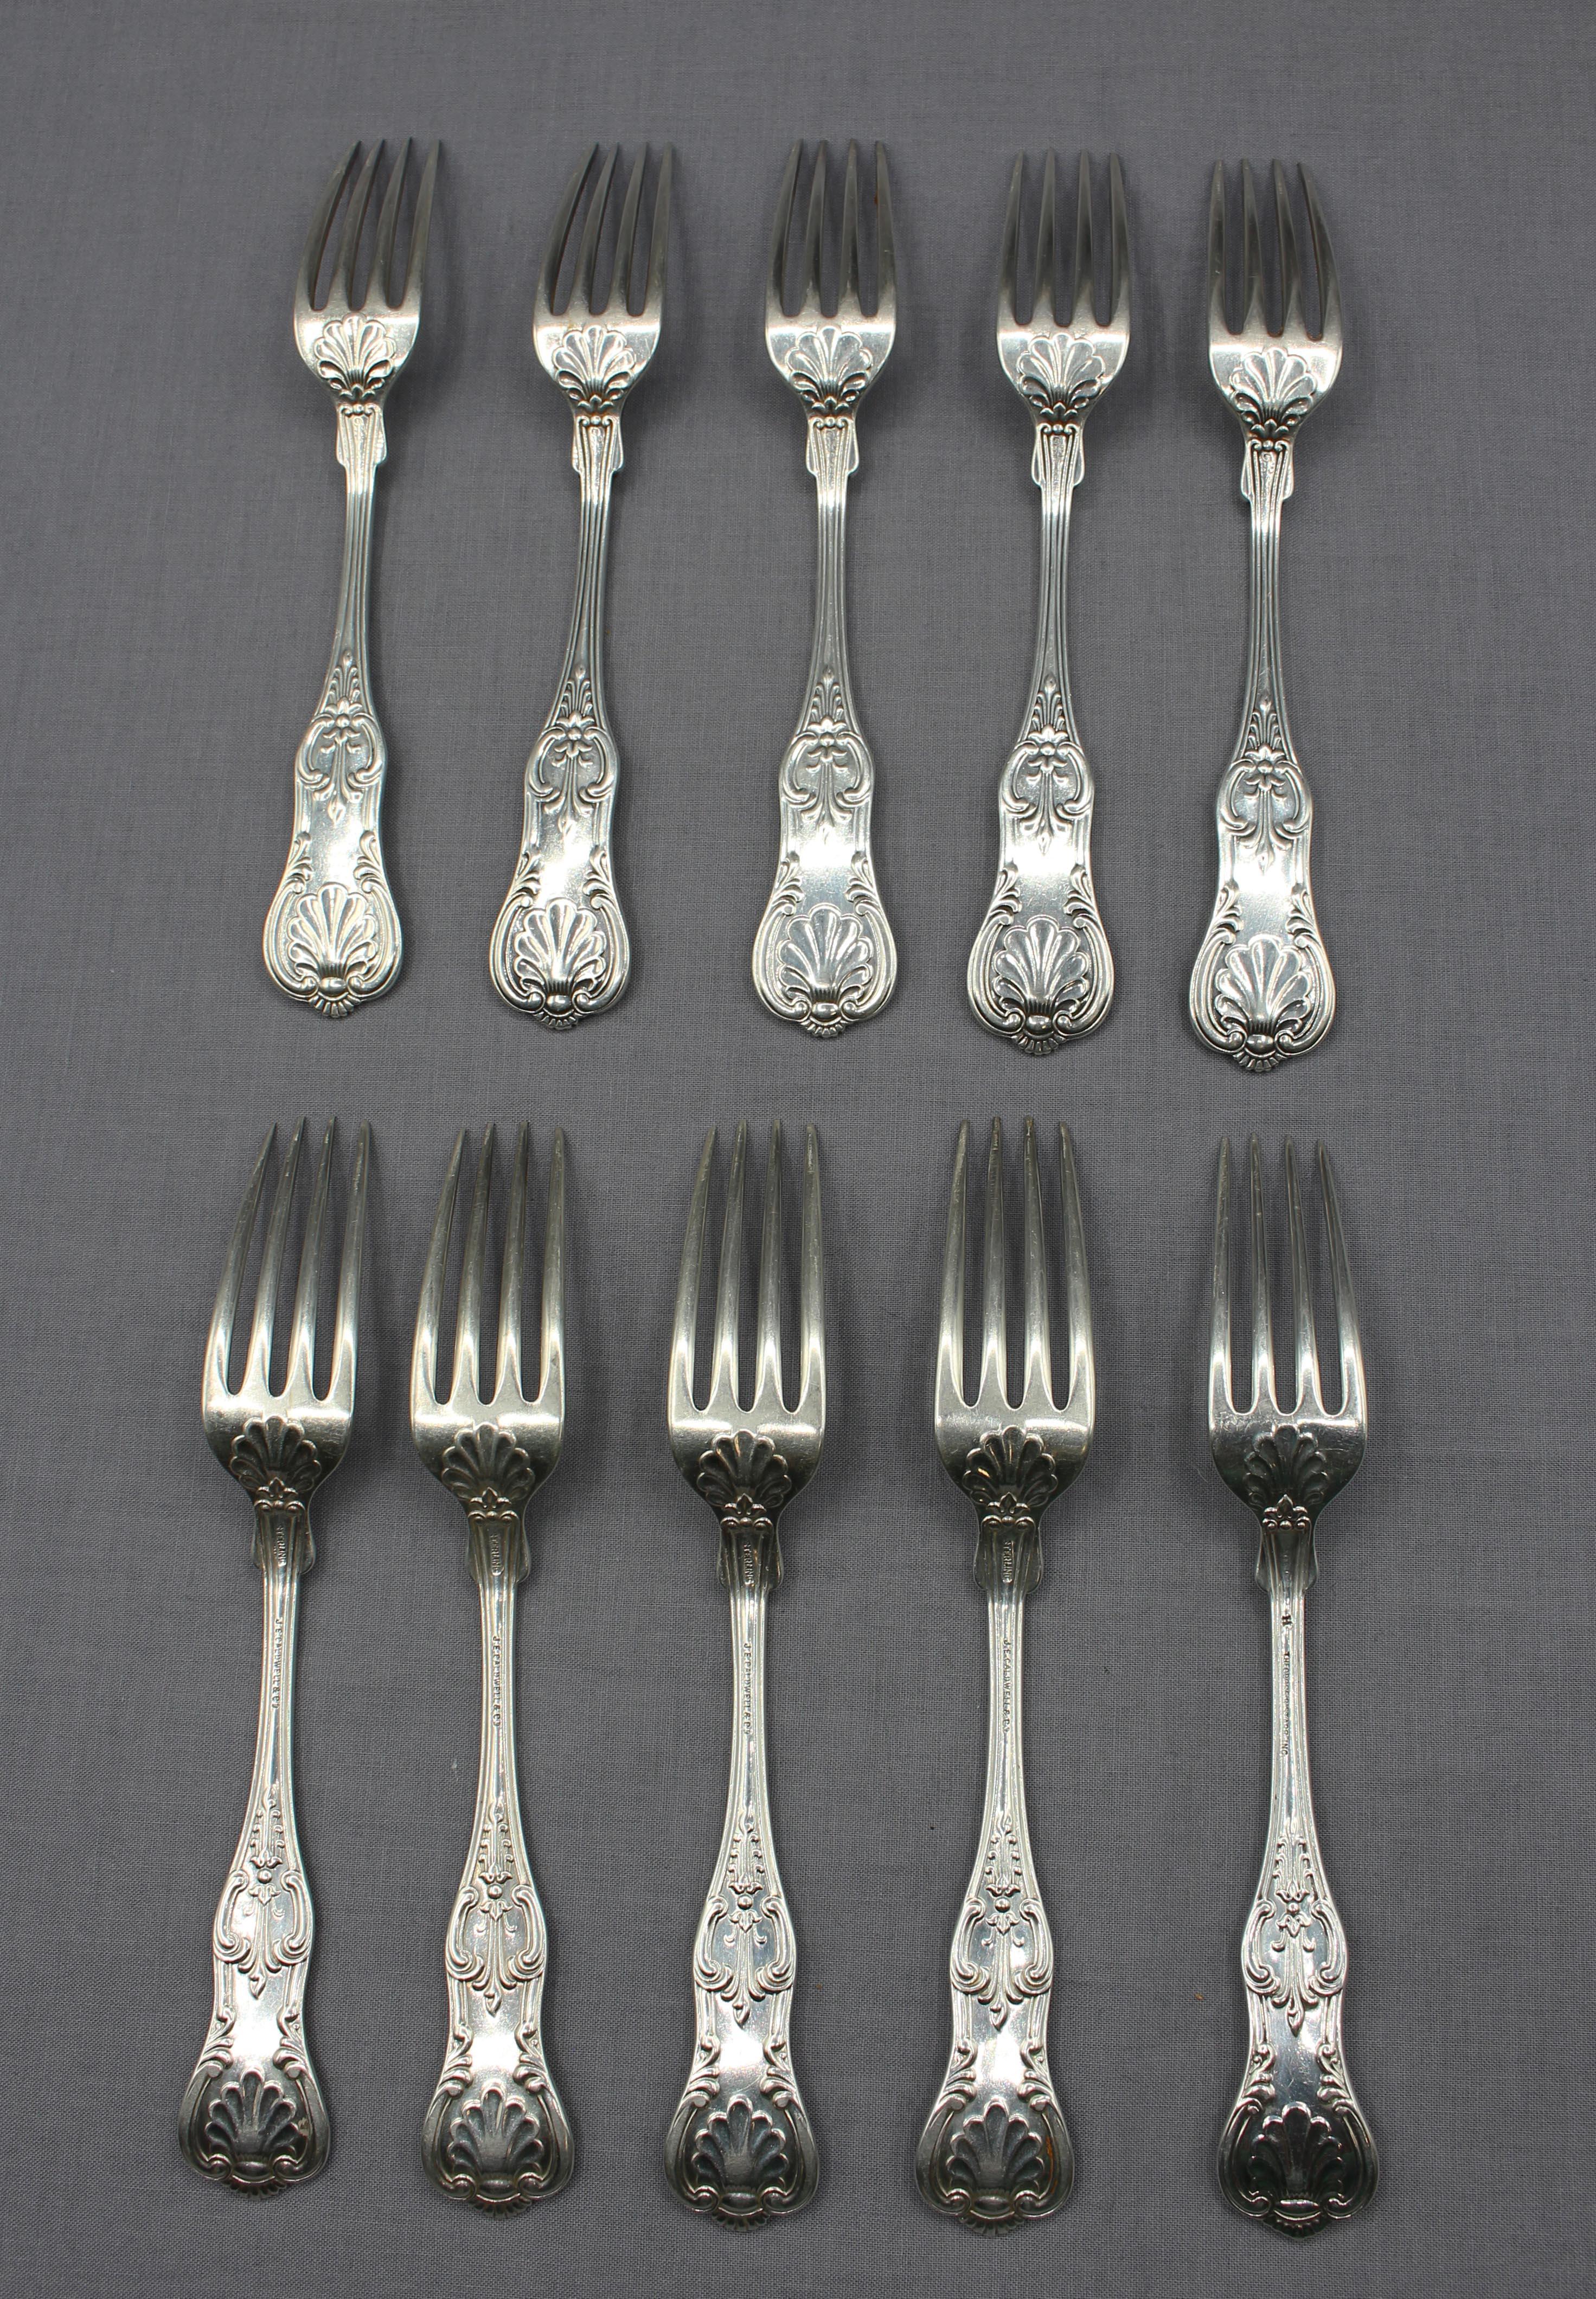 A matched set of 10 sterling silver luncheon forks 